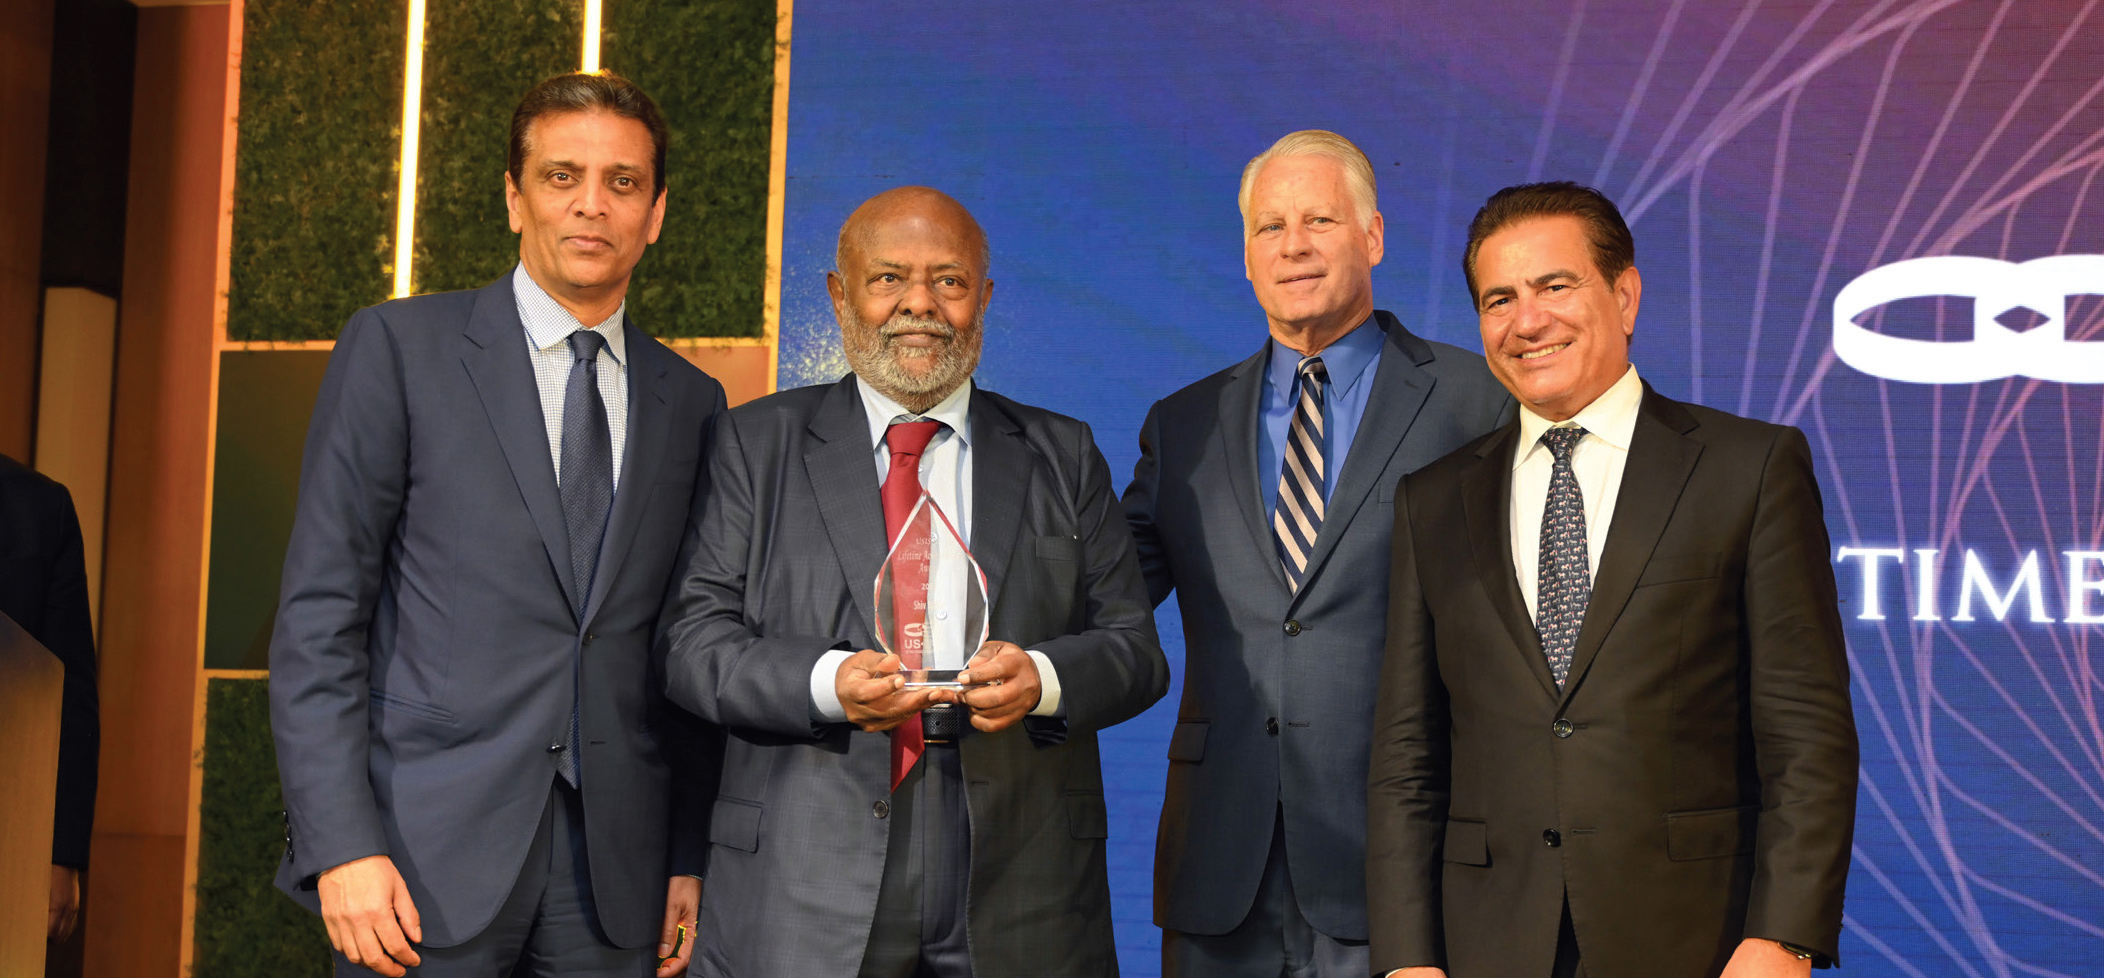 The US-India Strategic Partnership Forum honored HCLTech Founder and Chairman Emeritus, Shiv Nadar, with the Lifetime Achievement Award.